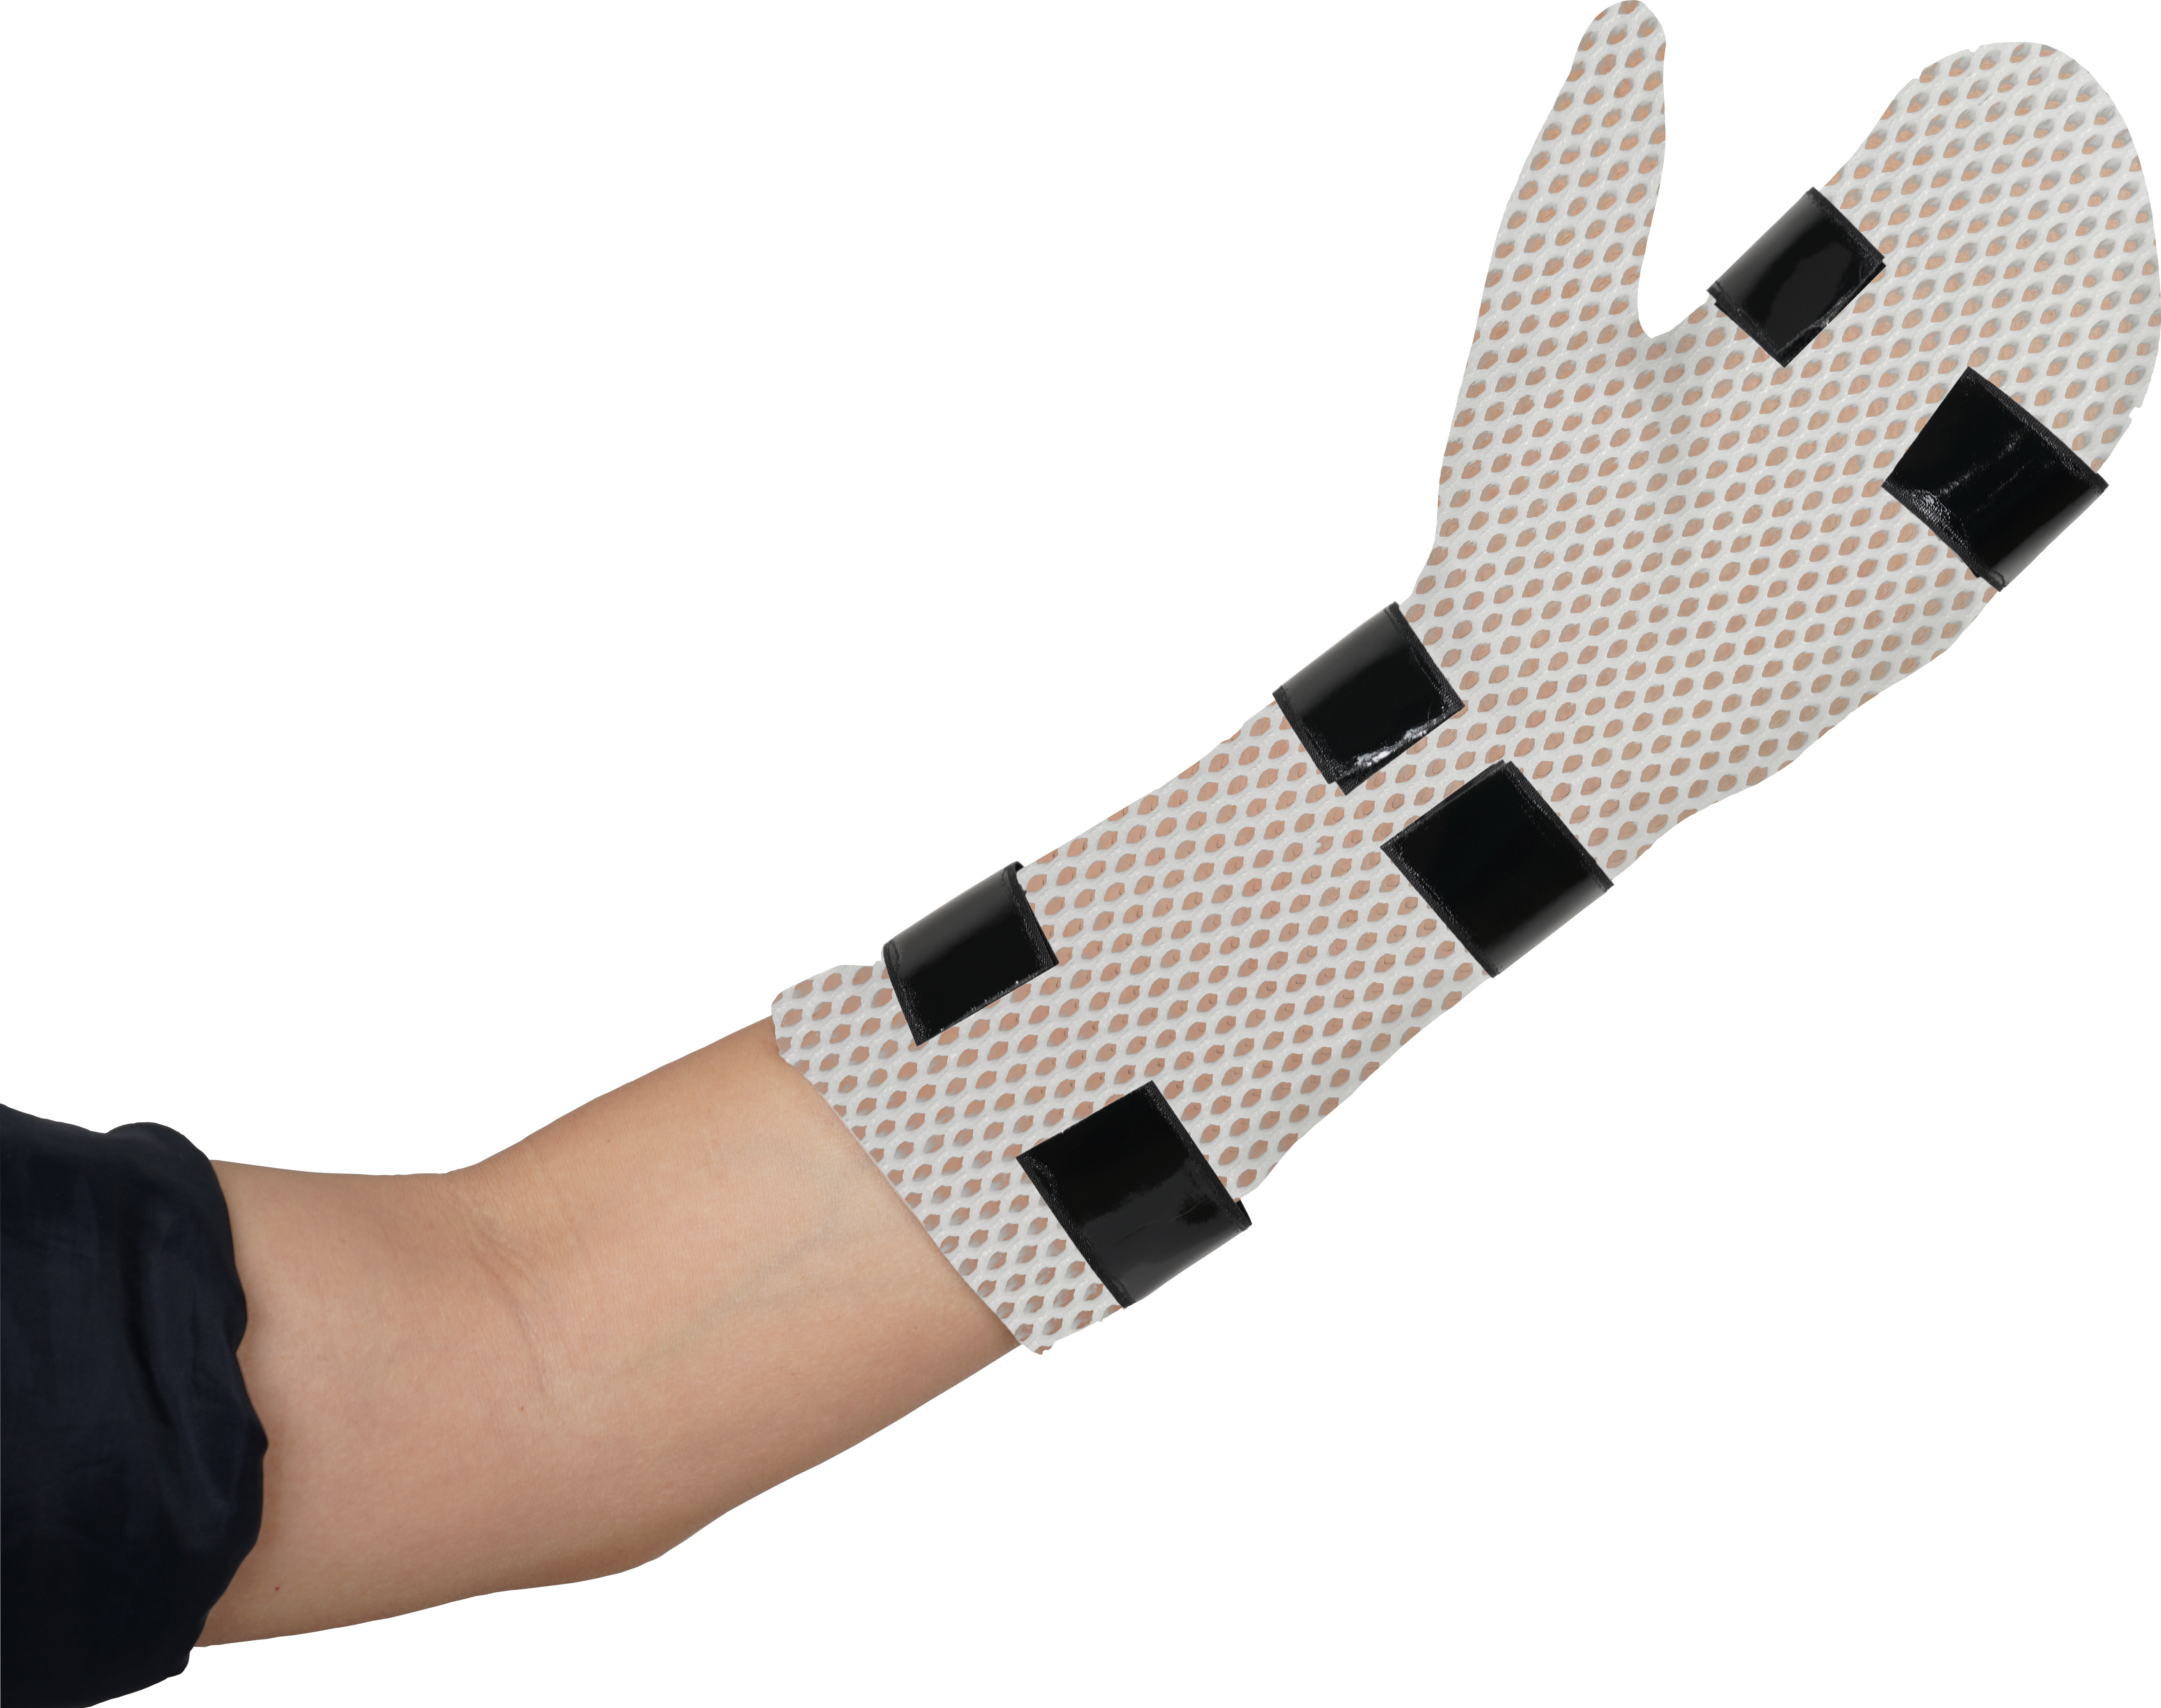 How to don a thermoplastic wrist splint？